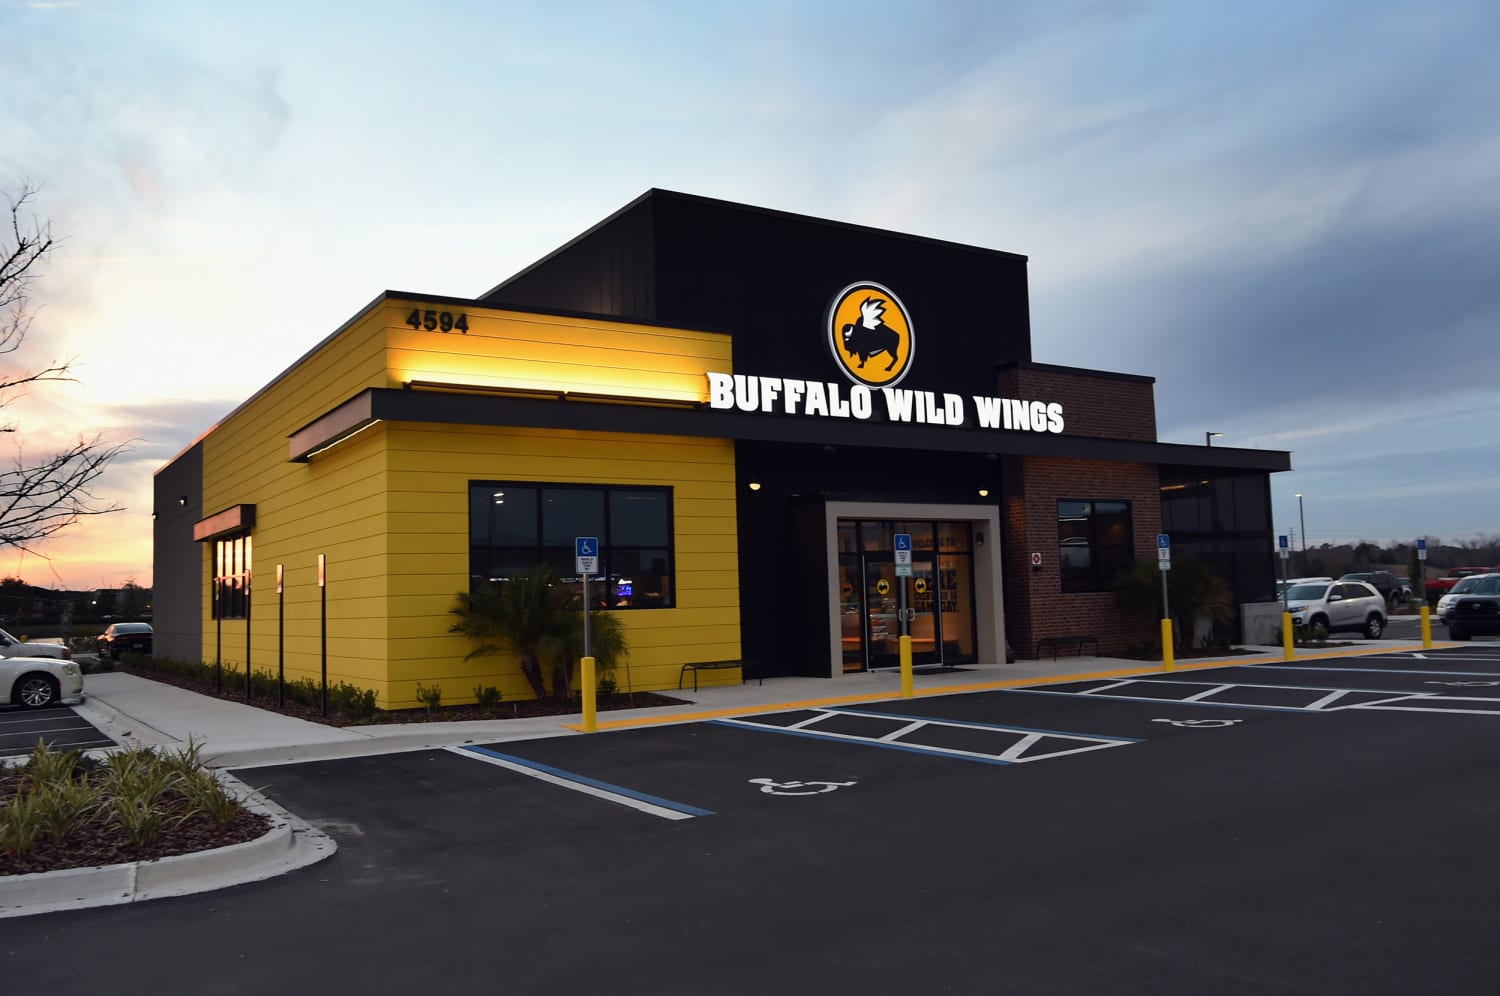 Buffalo Wild Wings employees fired for telling black family to move to please